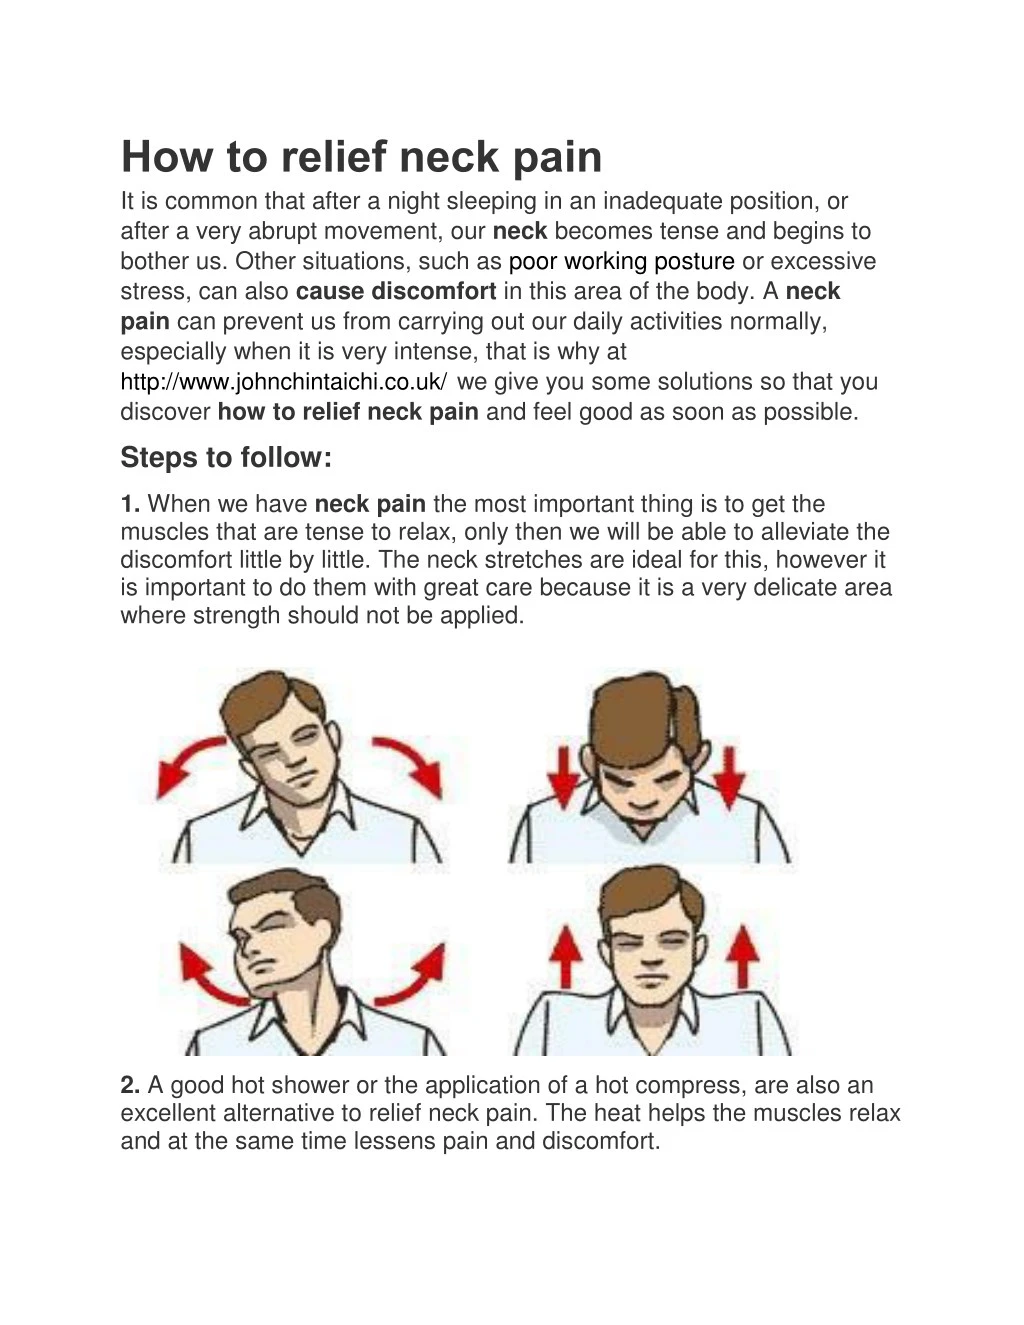 how to relief neck pain it is common that after